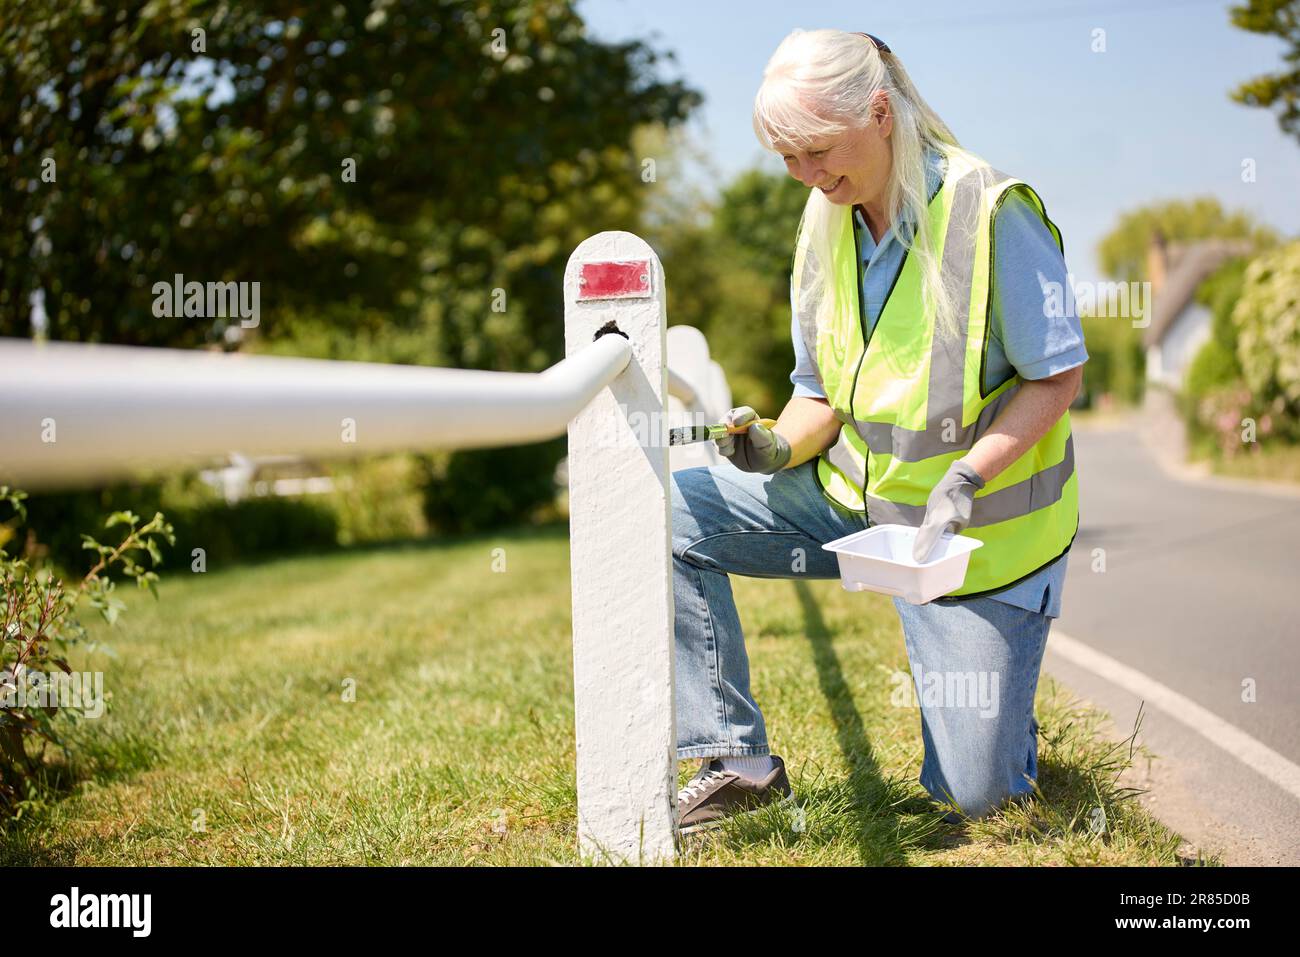 Senior Retired Woman Helping To Maintain Community By Painting Fence Post Stock Photo